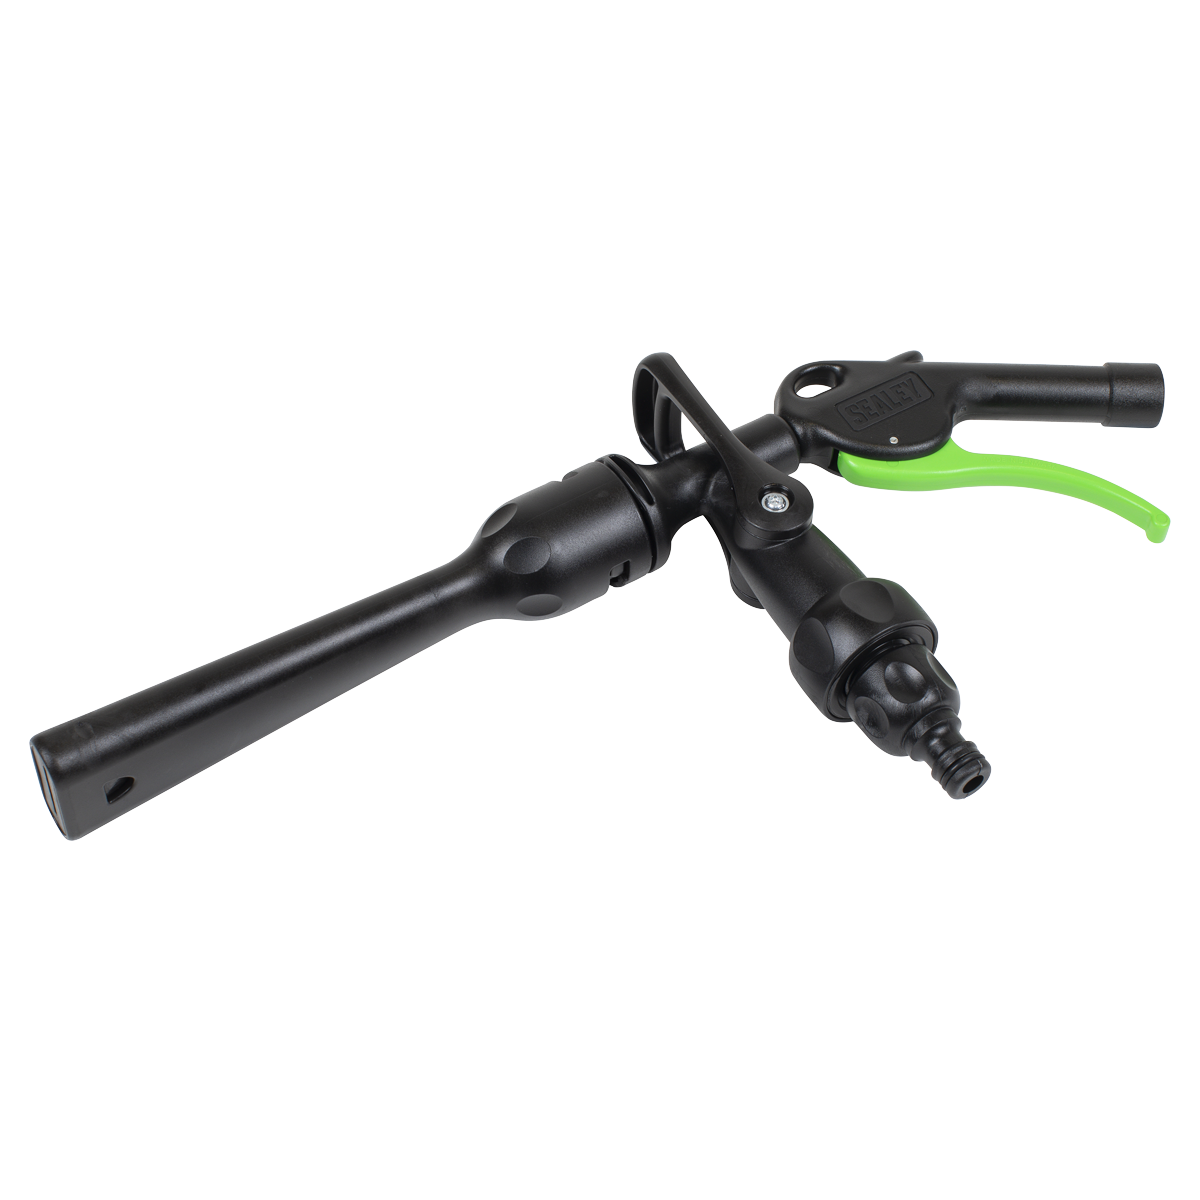 WIDE NOZZLE ADAPTOR USES AIR AND WATER – To form a powerful jet washer, which cleans or dries (air only).